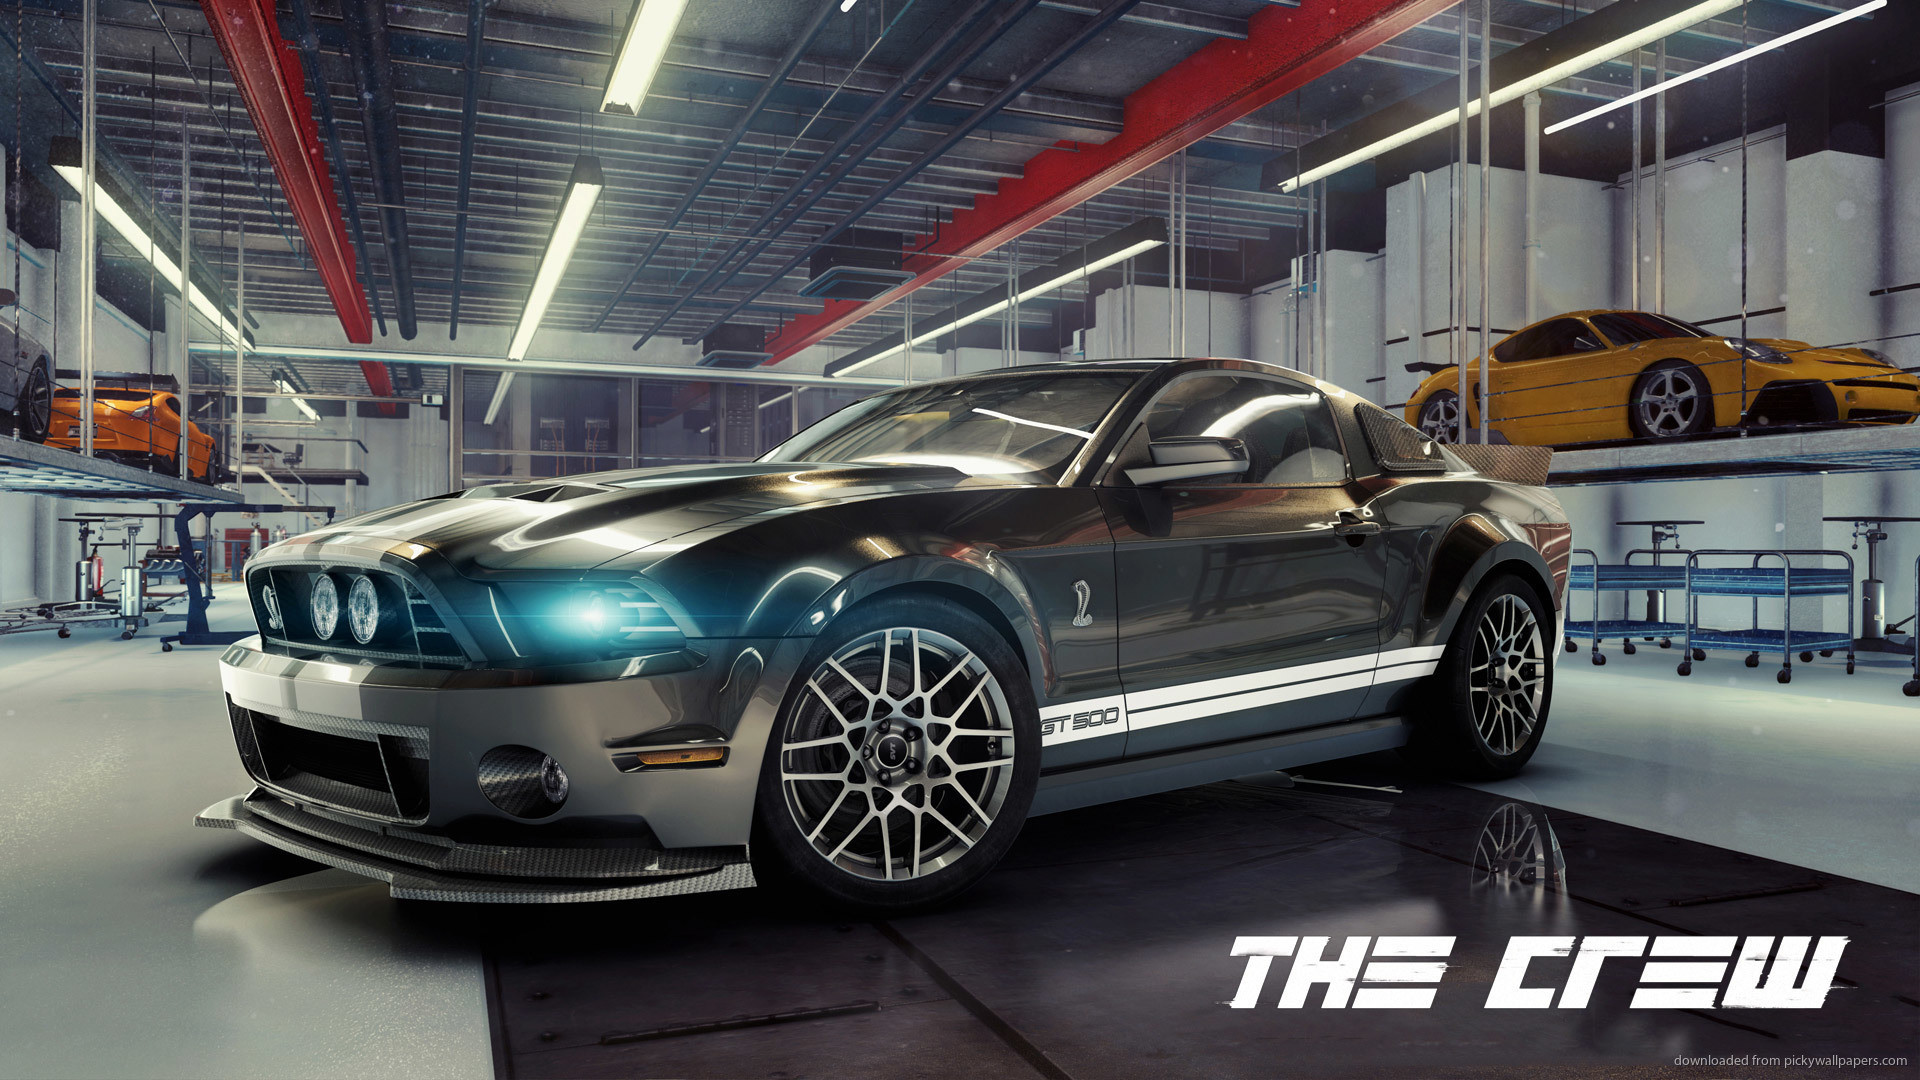 1920x1080 The Crew Mustang Shelby GT500 Wallpaper picture